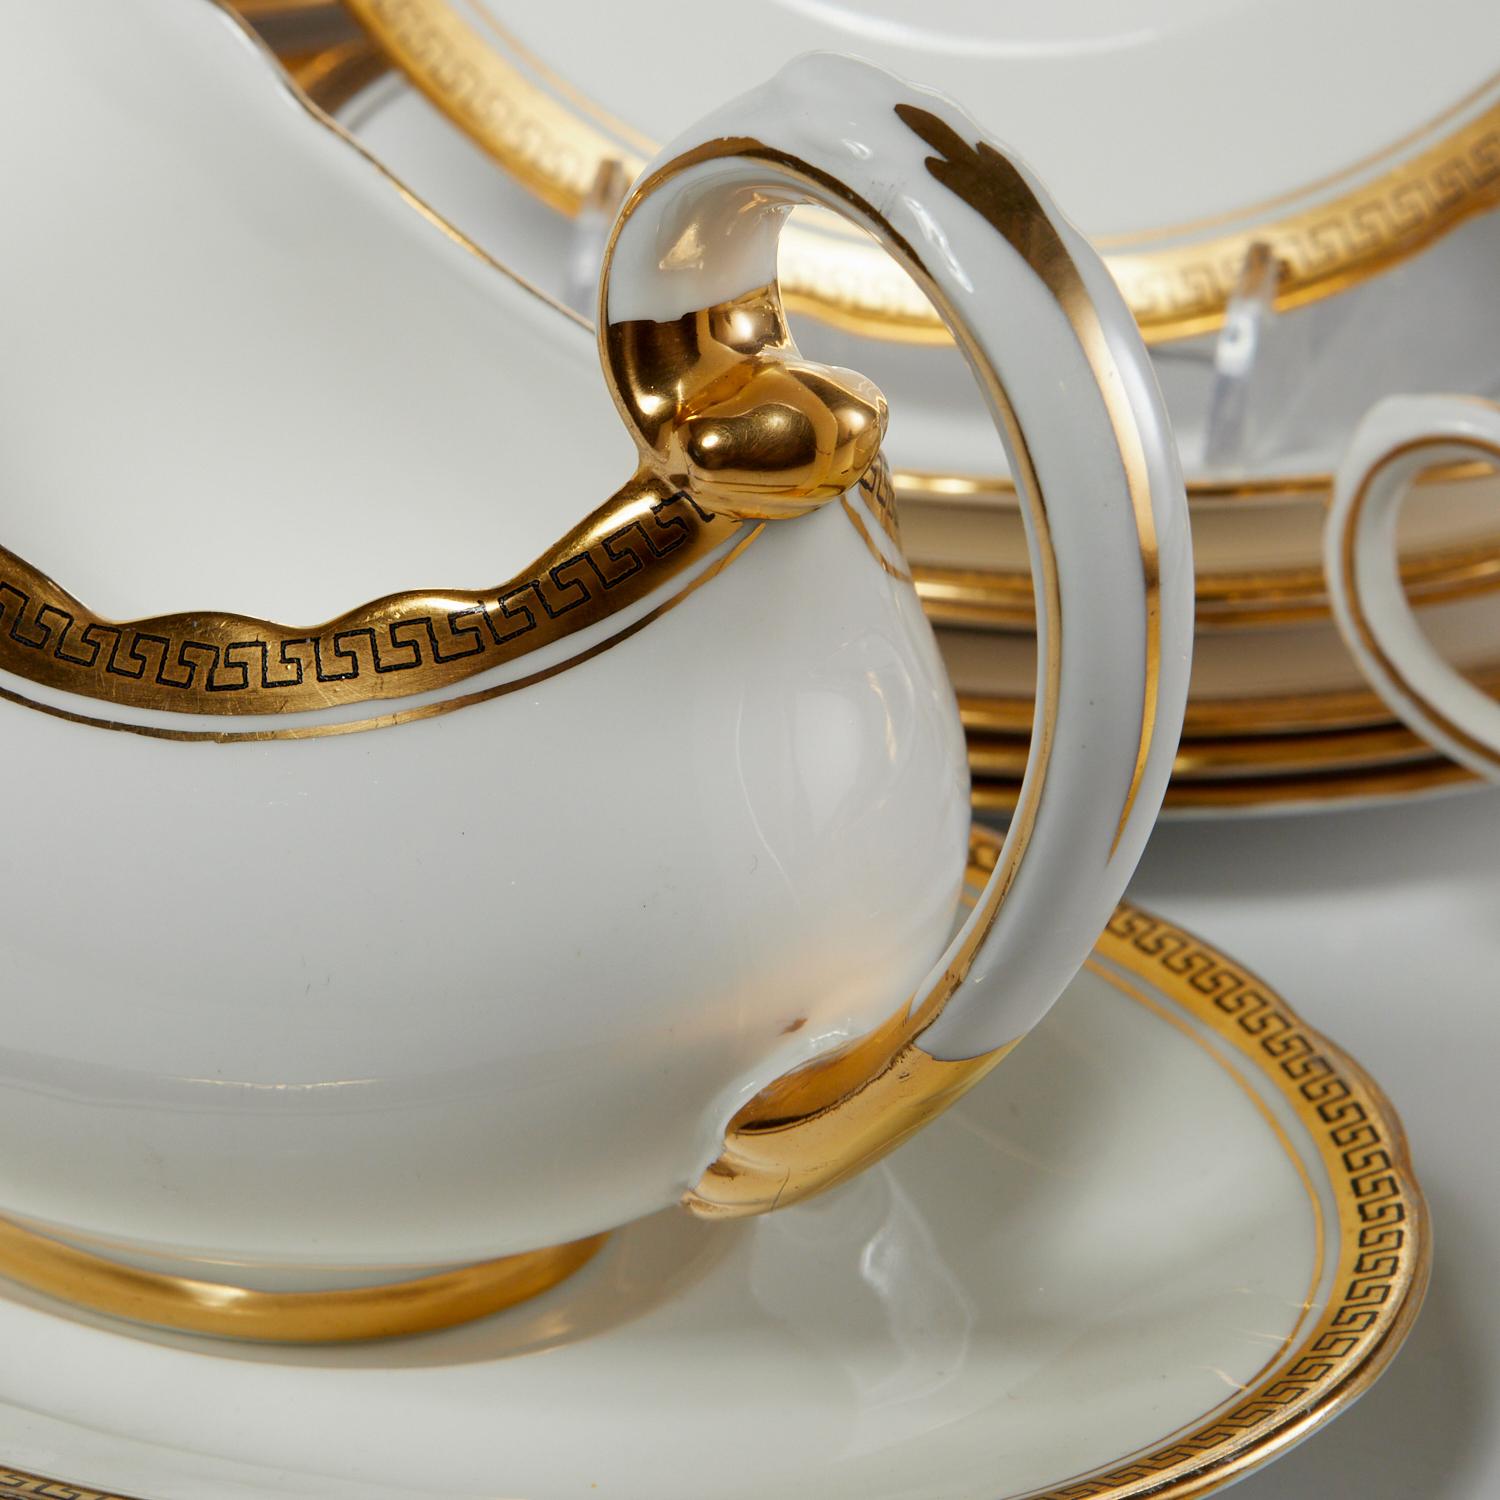 Neoclassical Mid 20th C. English Porcelain Dinner Service (52 Pieces) for Harrods of London For Sale